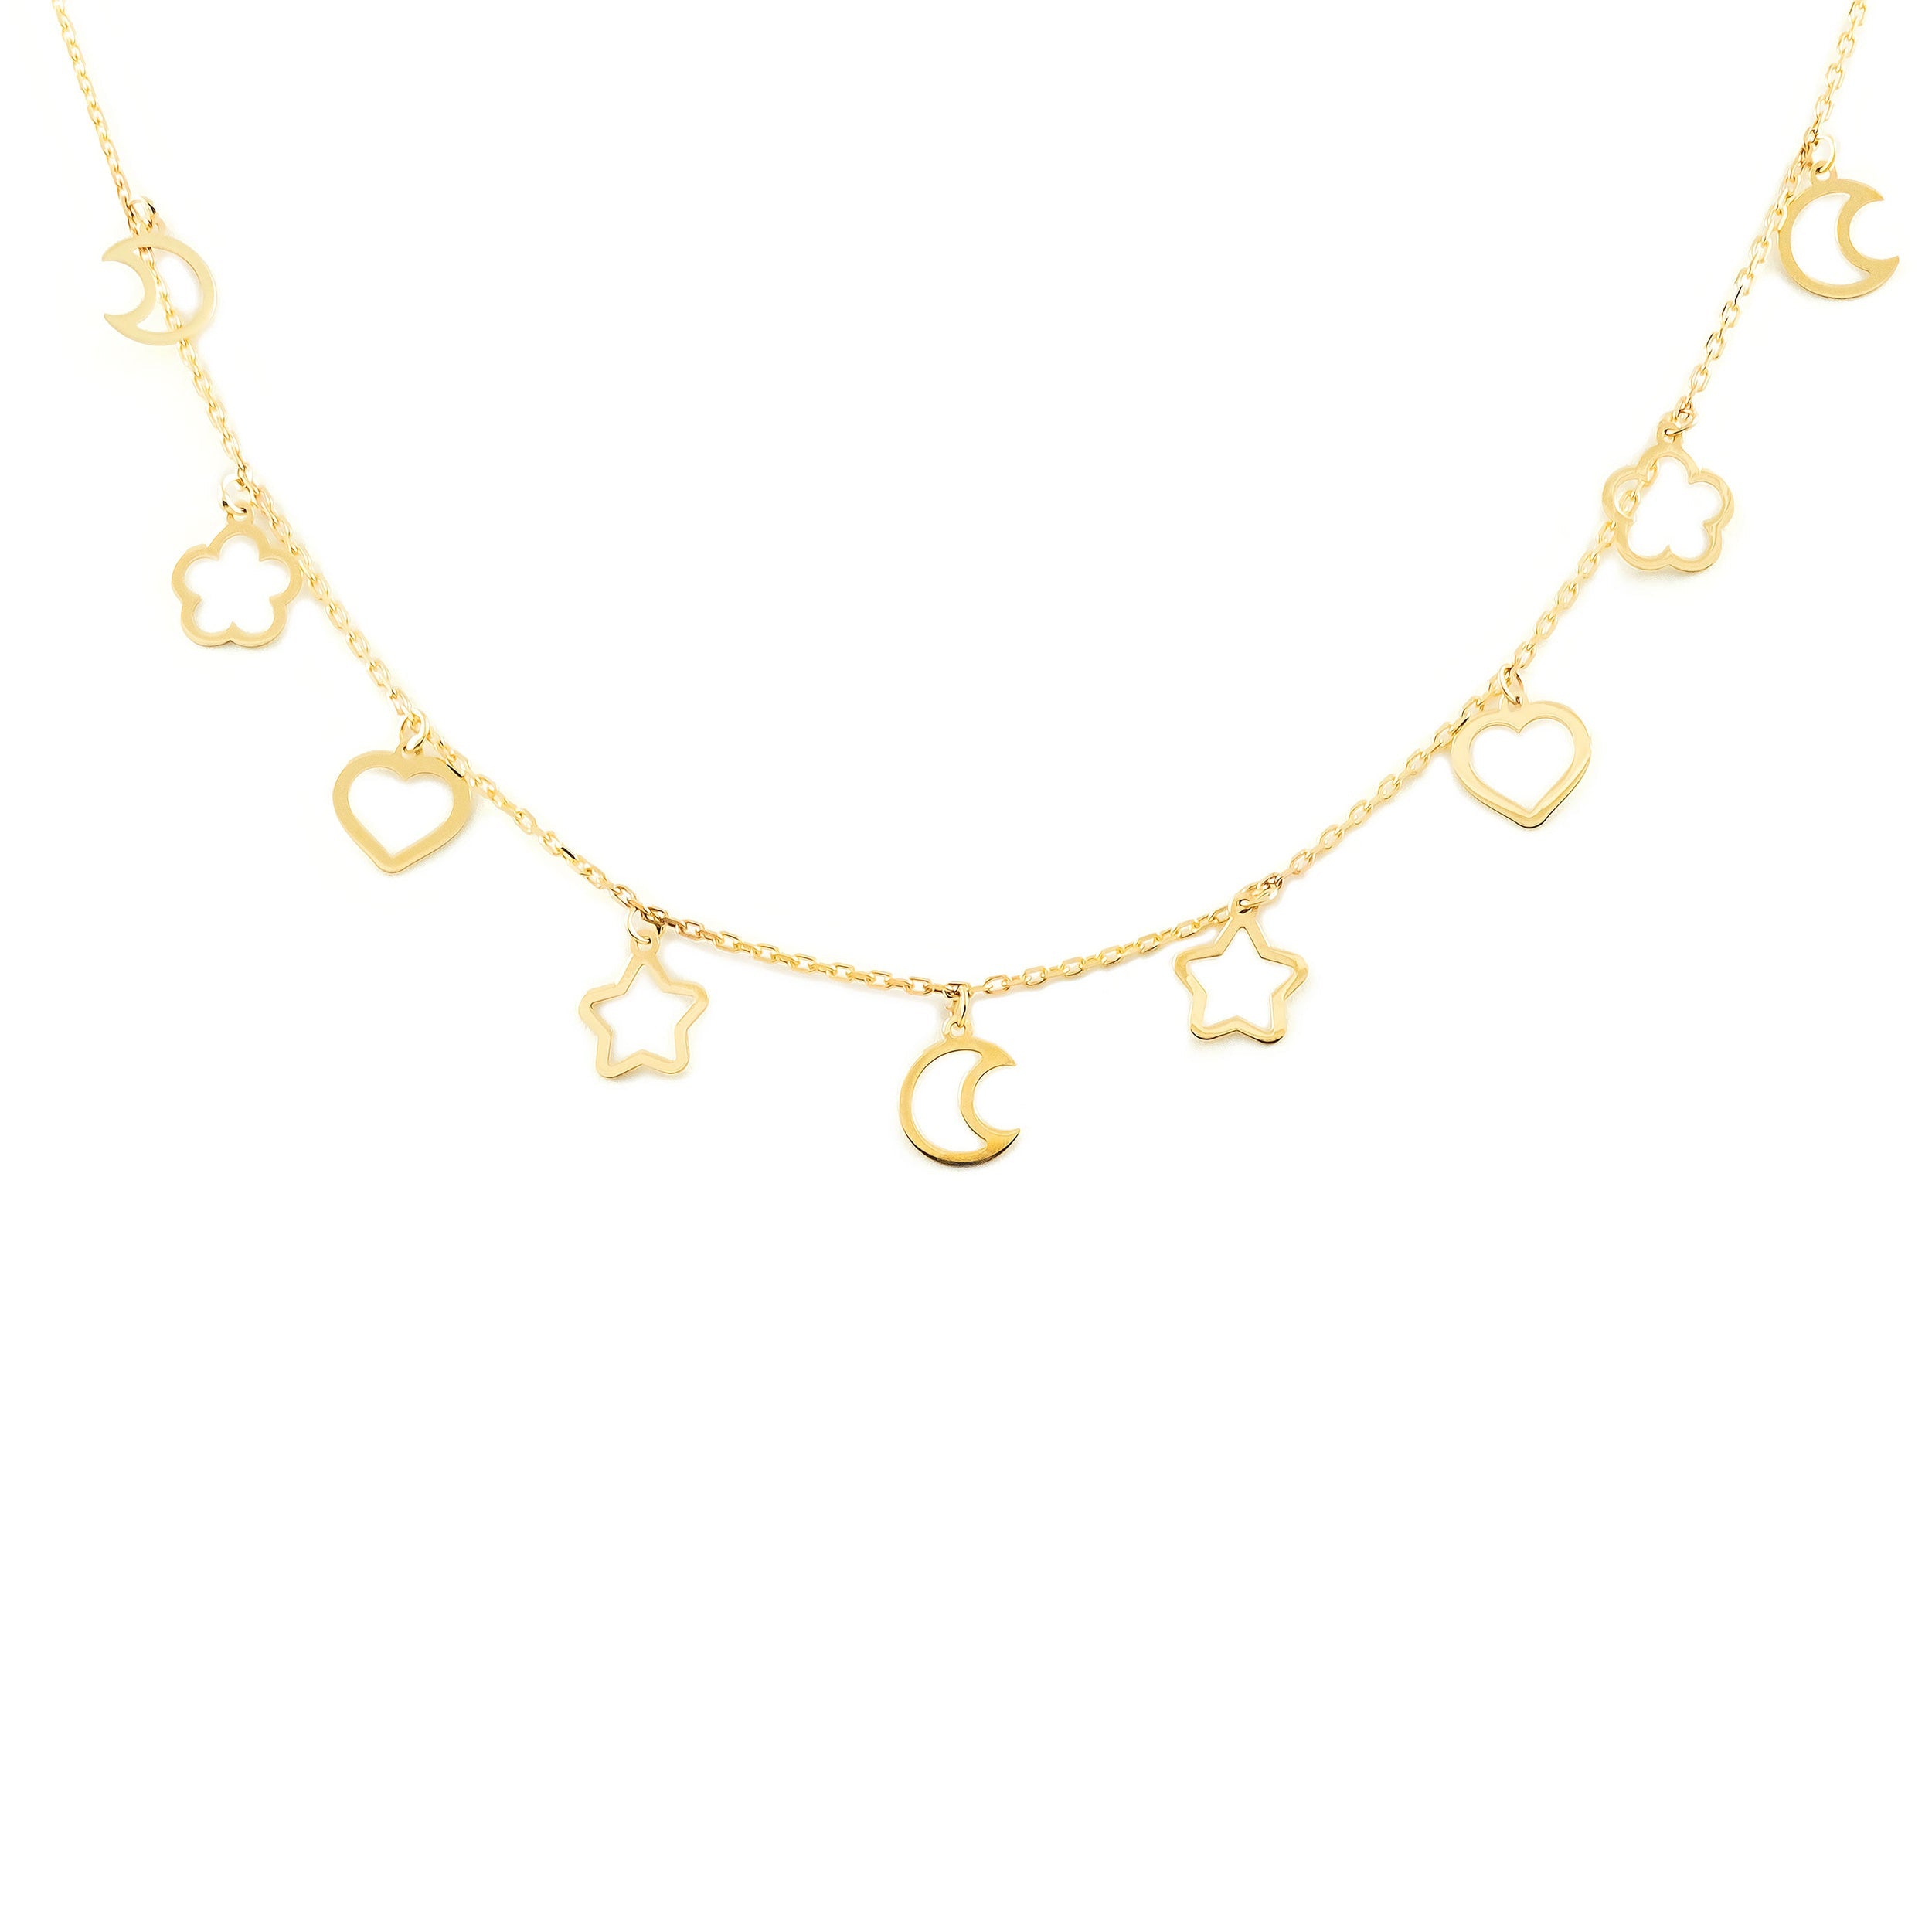 Women's Necklace 9K Yellow Gold Shiny Charms